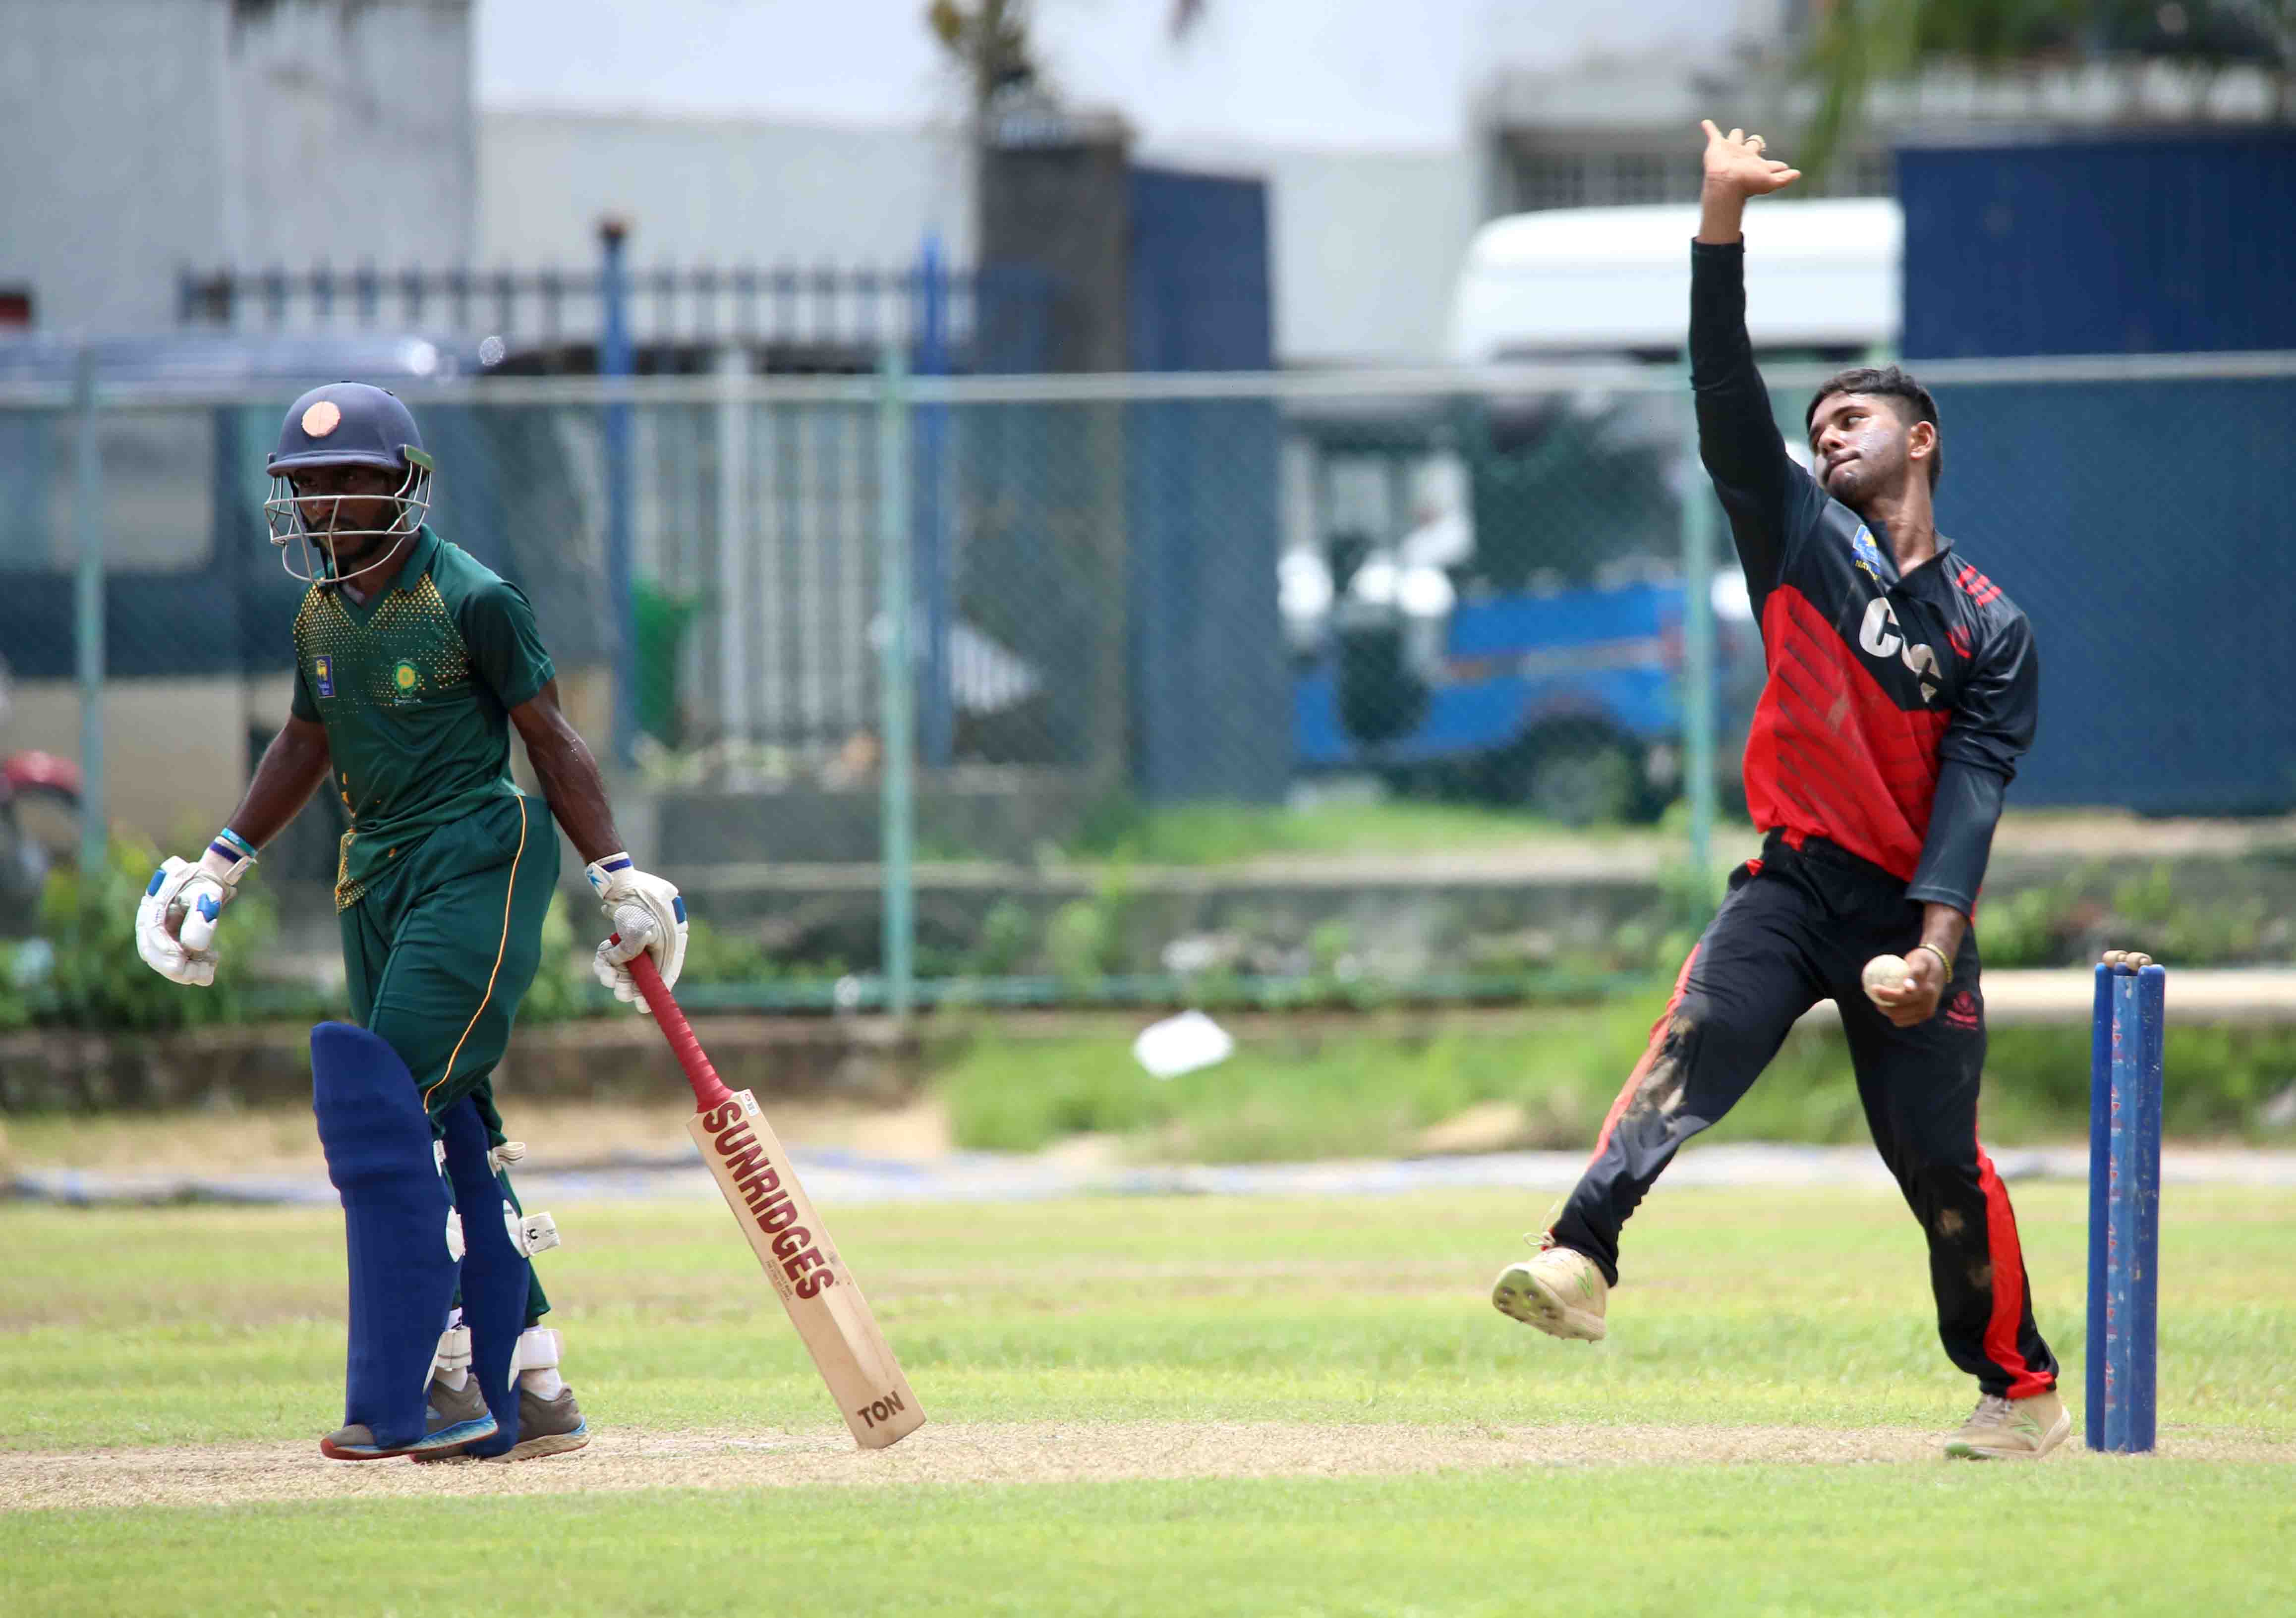 Top teams CCC, Colts, Chilaw Marians, SSC in Stroll in the Park wins